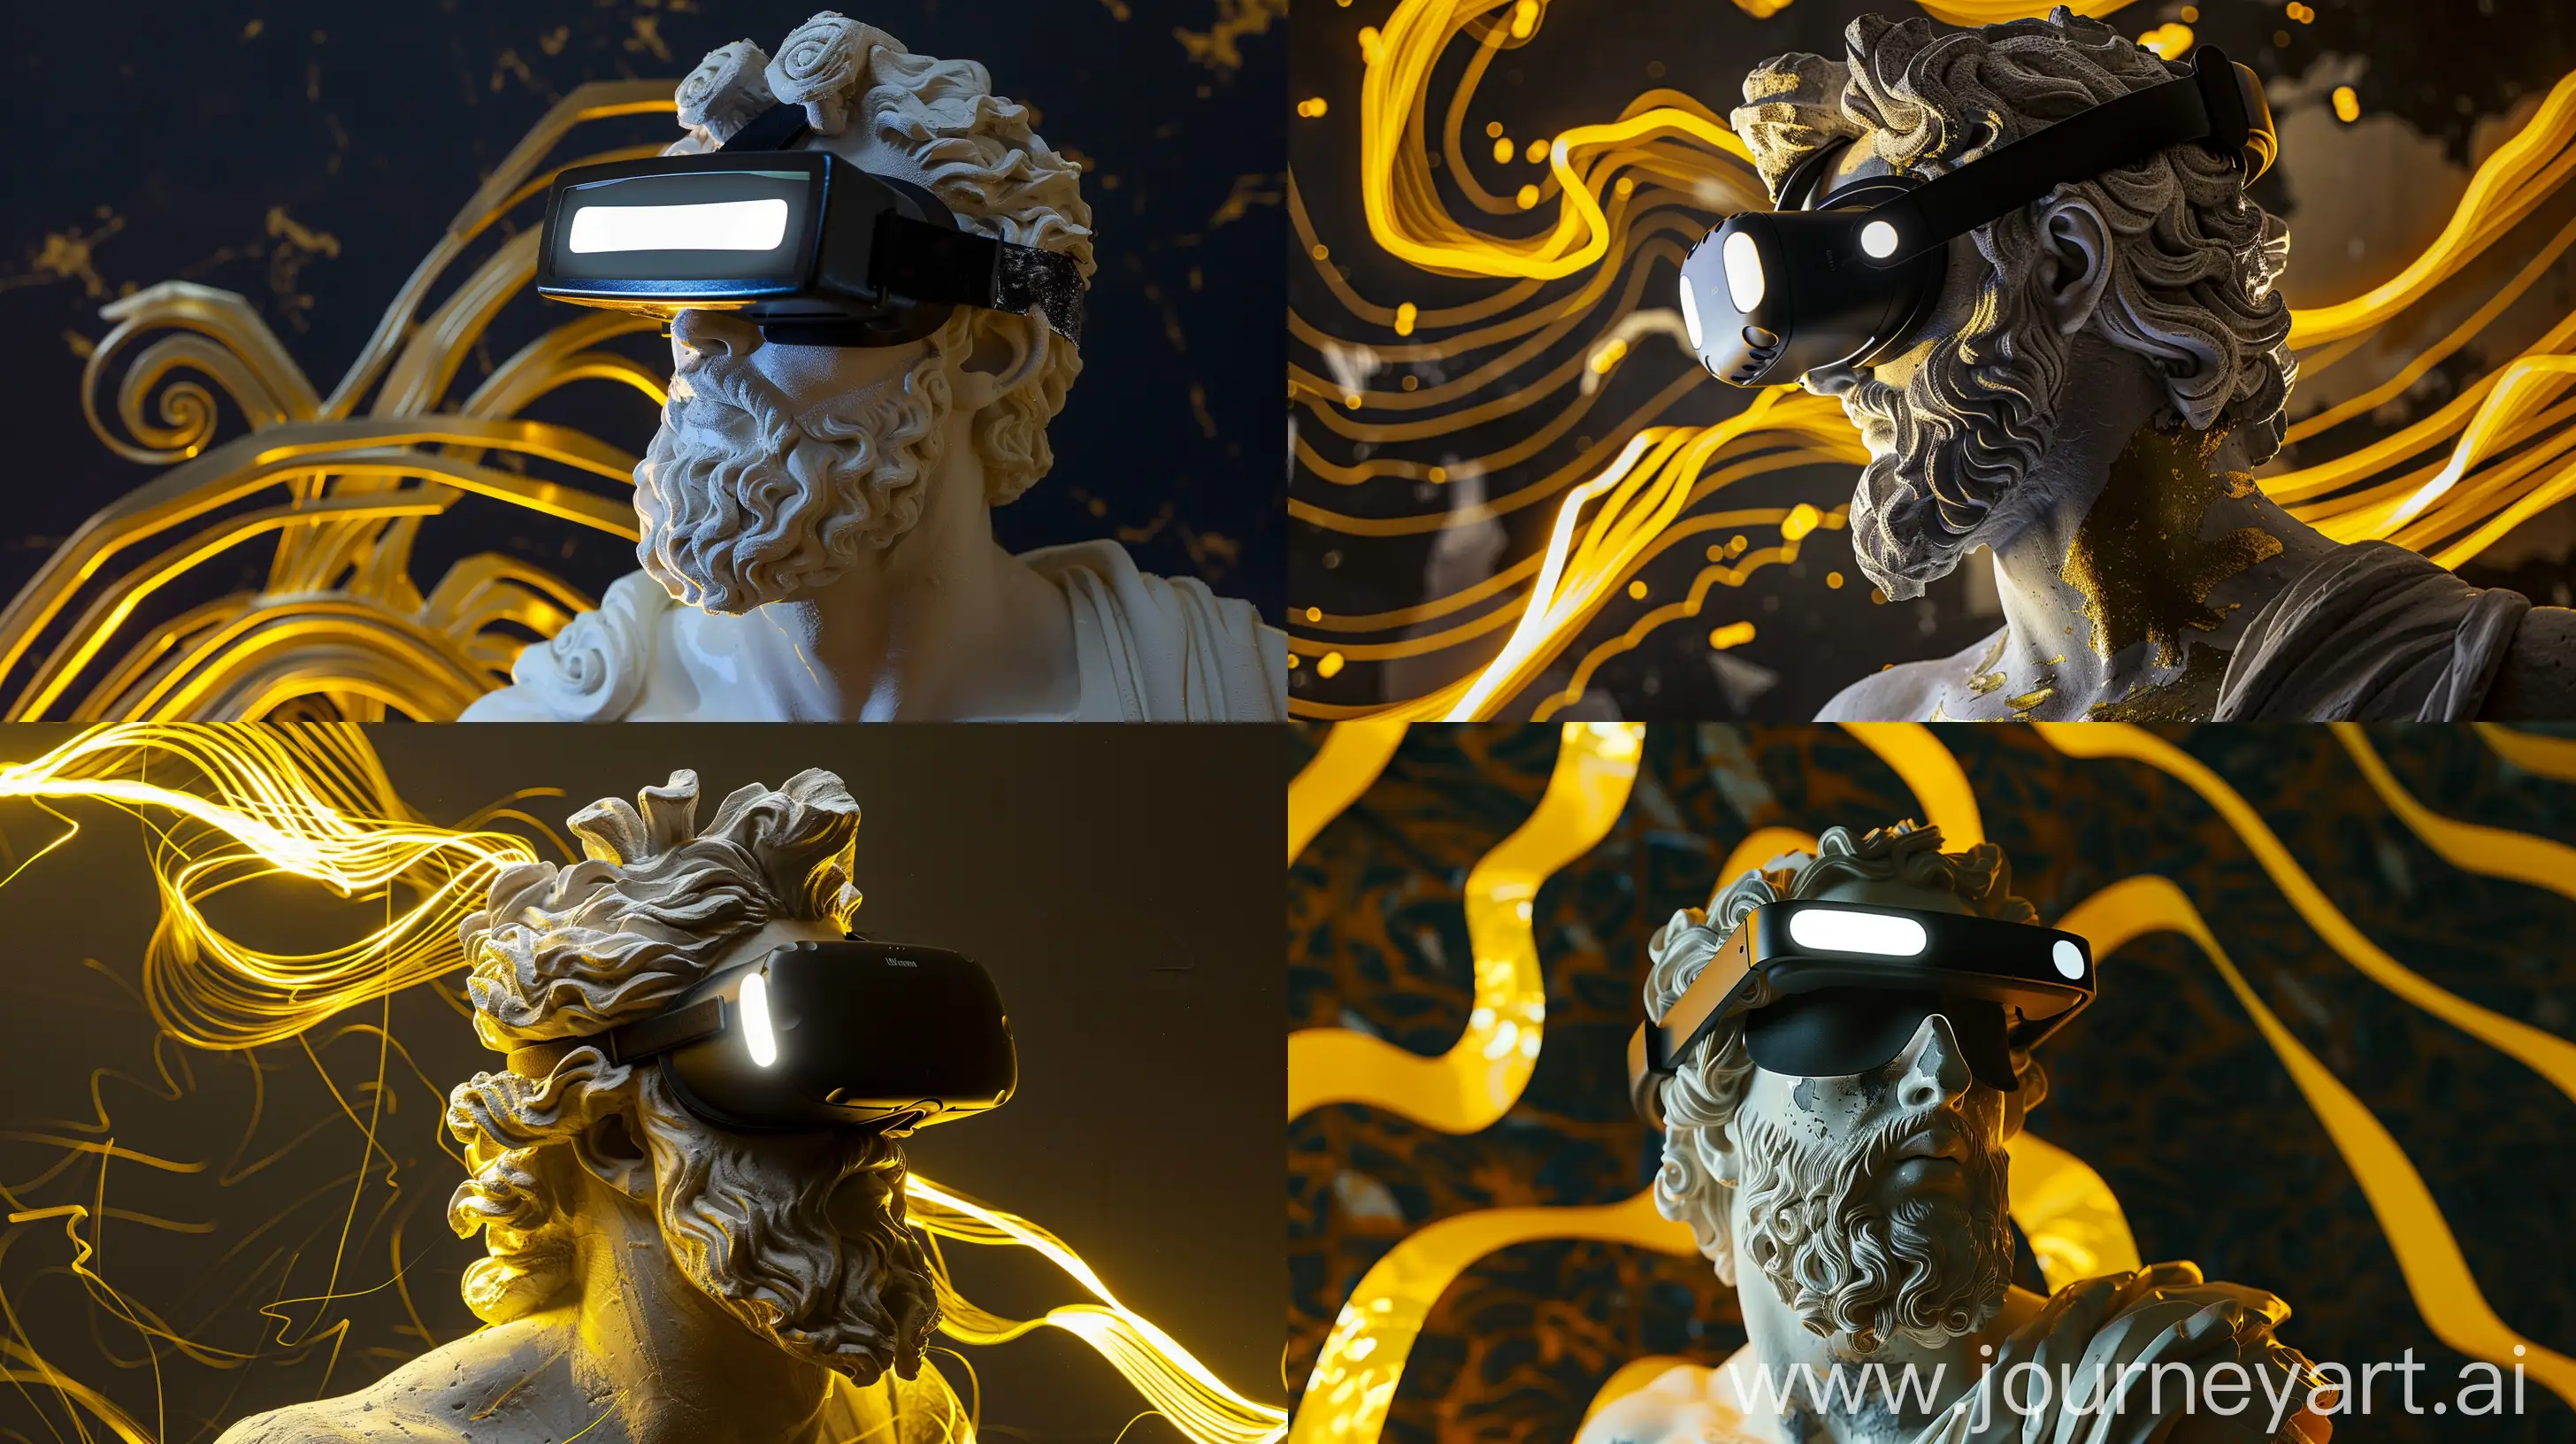 A Plaster Sculpture of Zeus, Black VR Glasses With White LED, Yellow Light Reflections on Sculpture, Gold Abstract Wave Pattern in Dark Background, Dreamy Pose, Medium Shot, High Precision --v 6.0 --ar 16:9